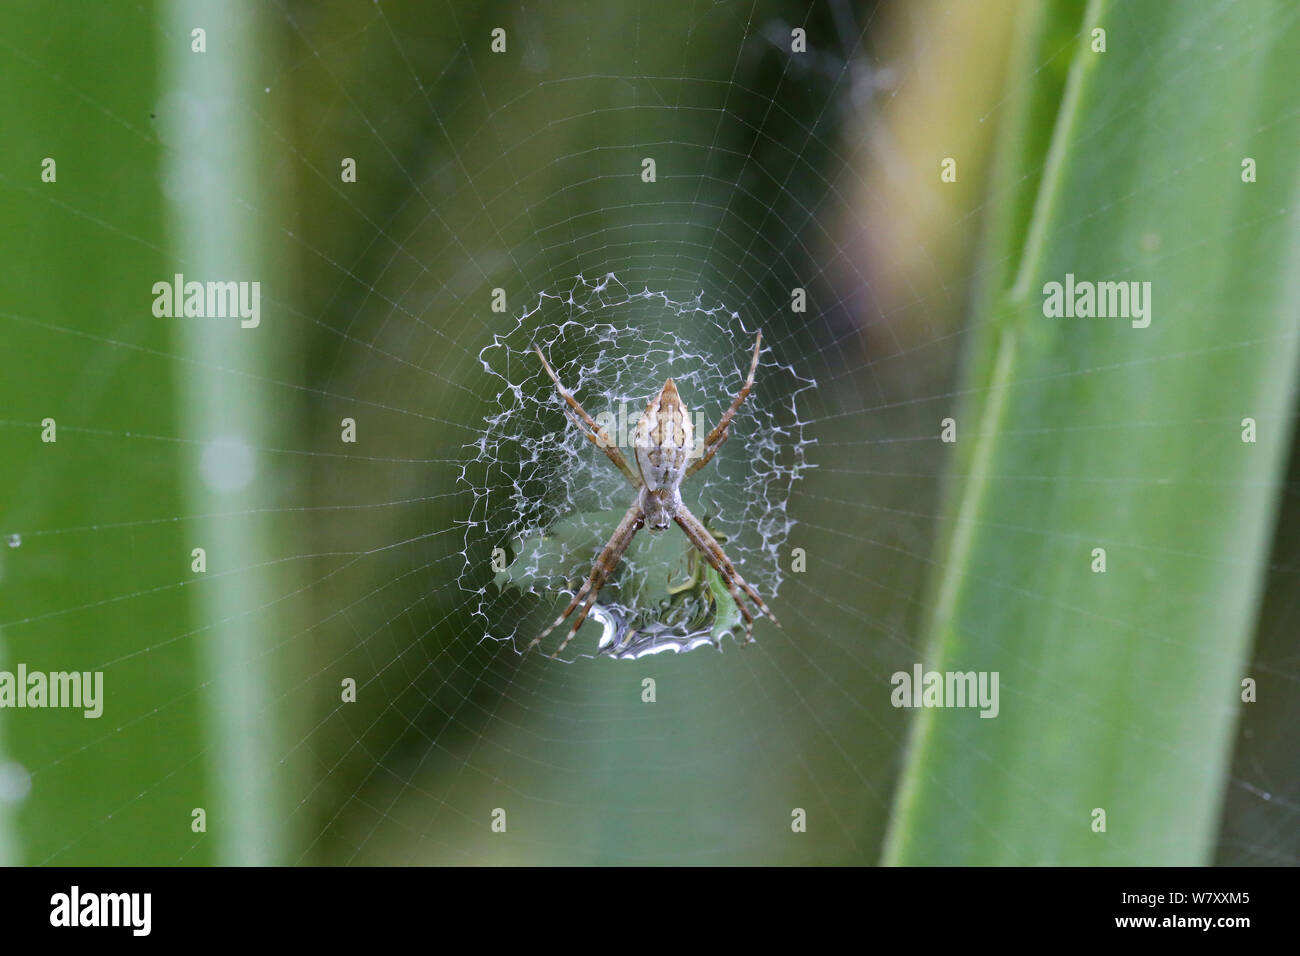 Silver argiope spider (Argiope argentata) juvenile with raindrop trapped in its stabilimentum. Tobago, West Indies. Stock Photo